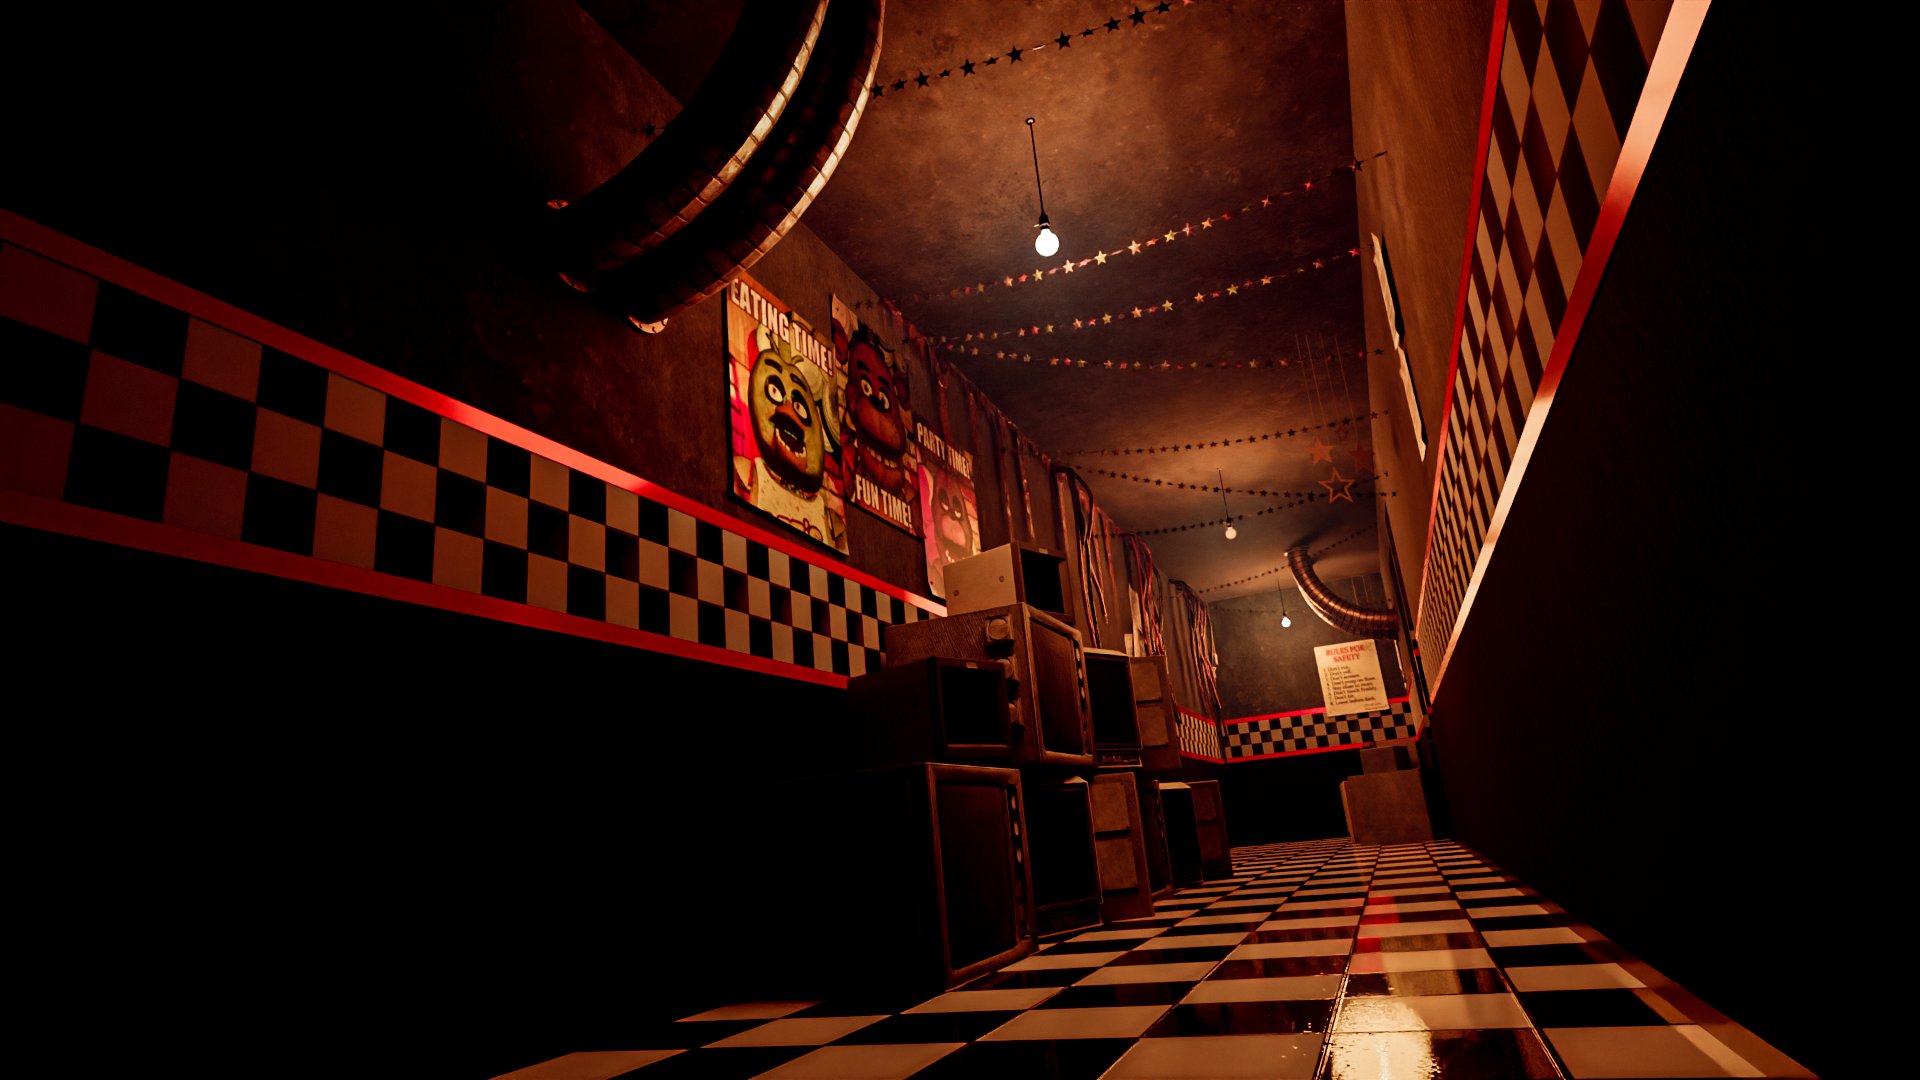 BUSTERS on X: FNAF 1 HW Map Remake Release! (More Images below) Made in  Blender 3.5 Originally ported by @WGug4_2 and fixed by @LukaszBorges and  then edited by me. Extra Assets used